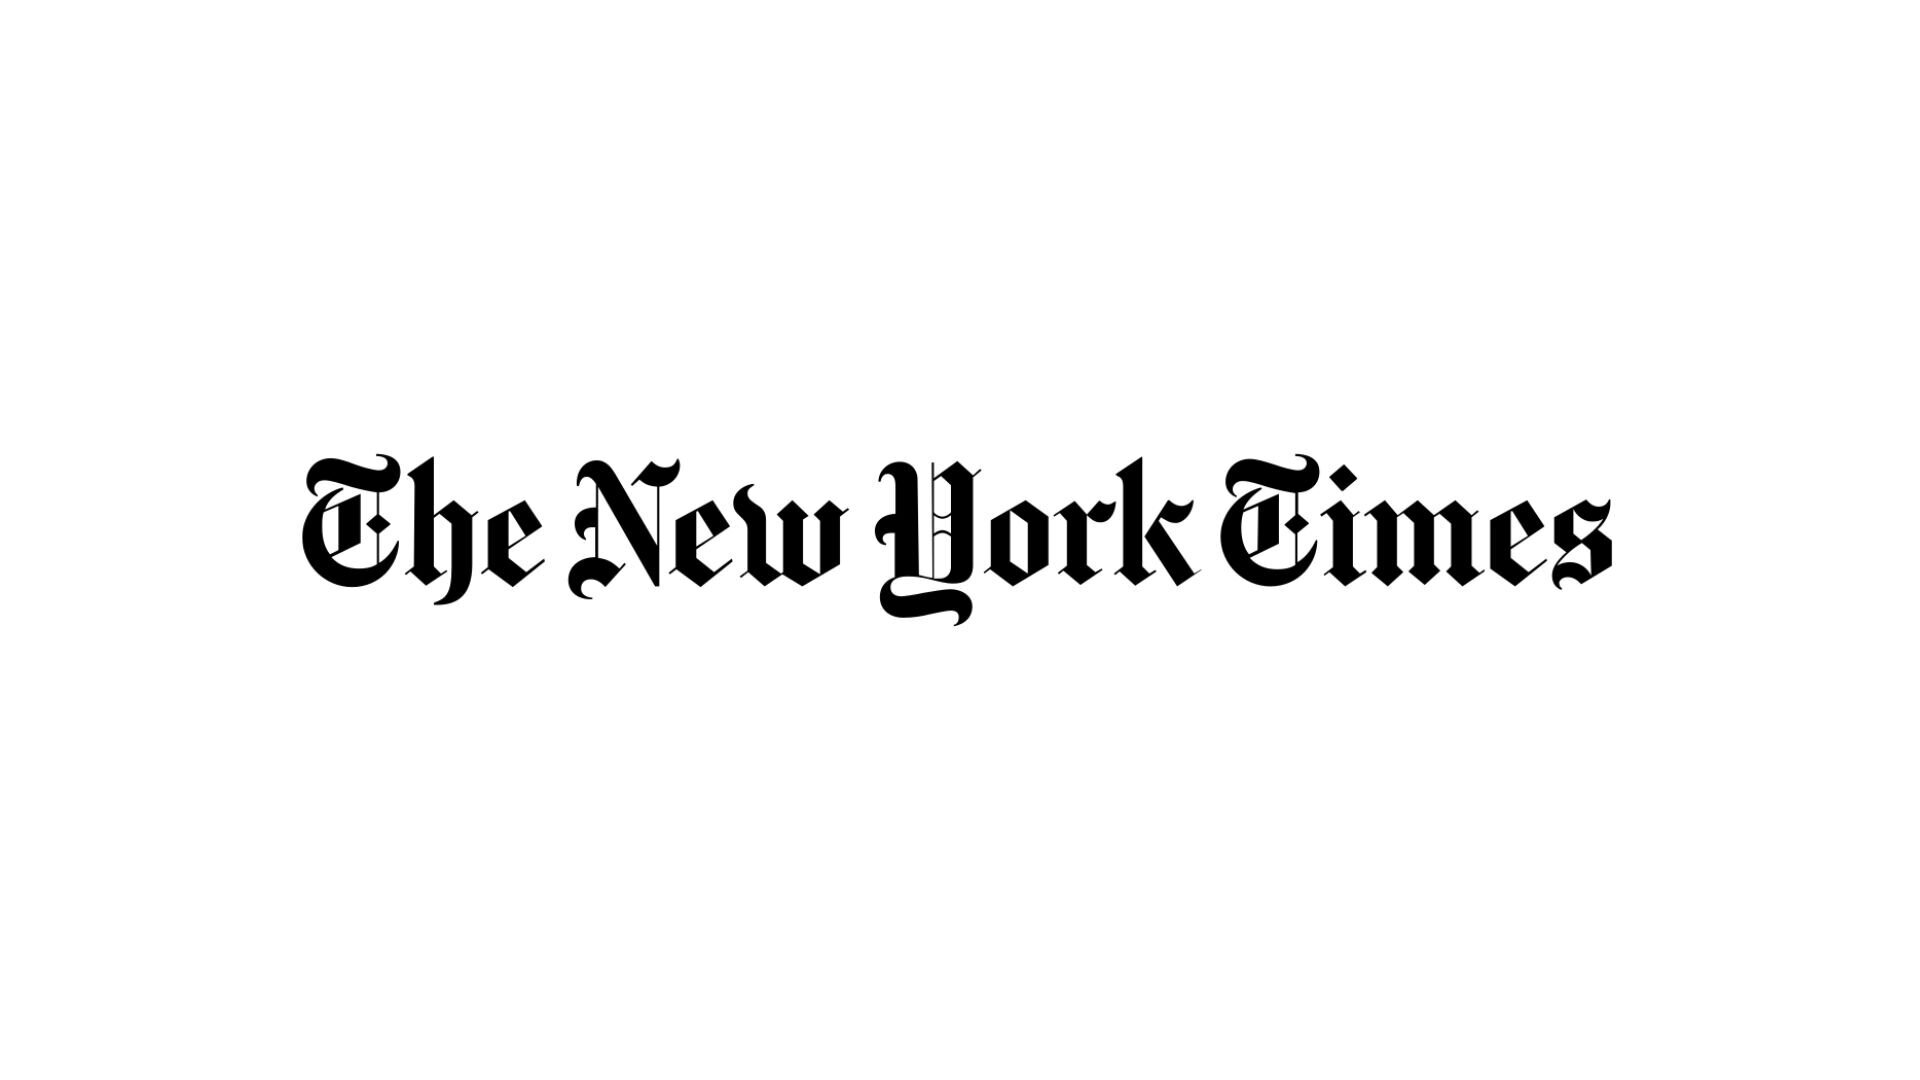 Elana Events feature logo for The New York Times